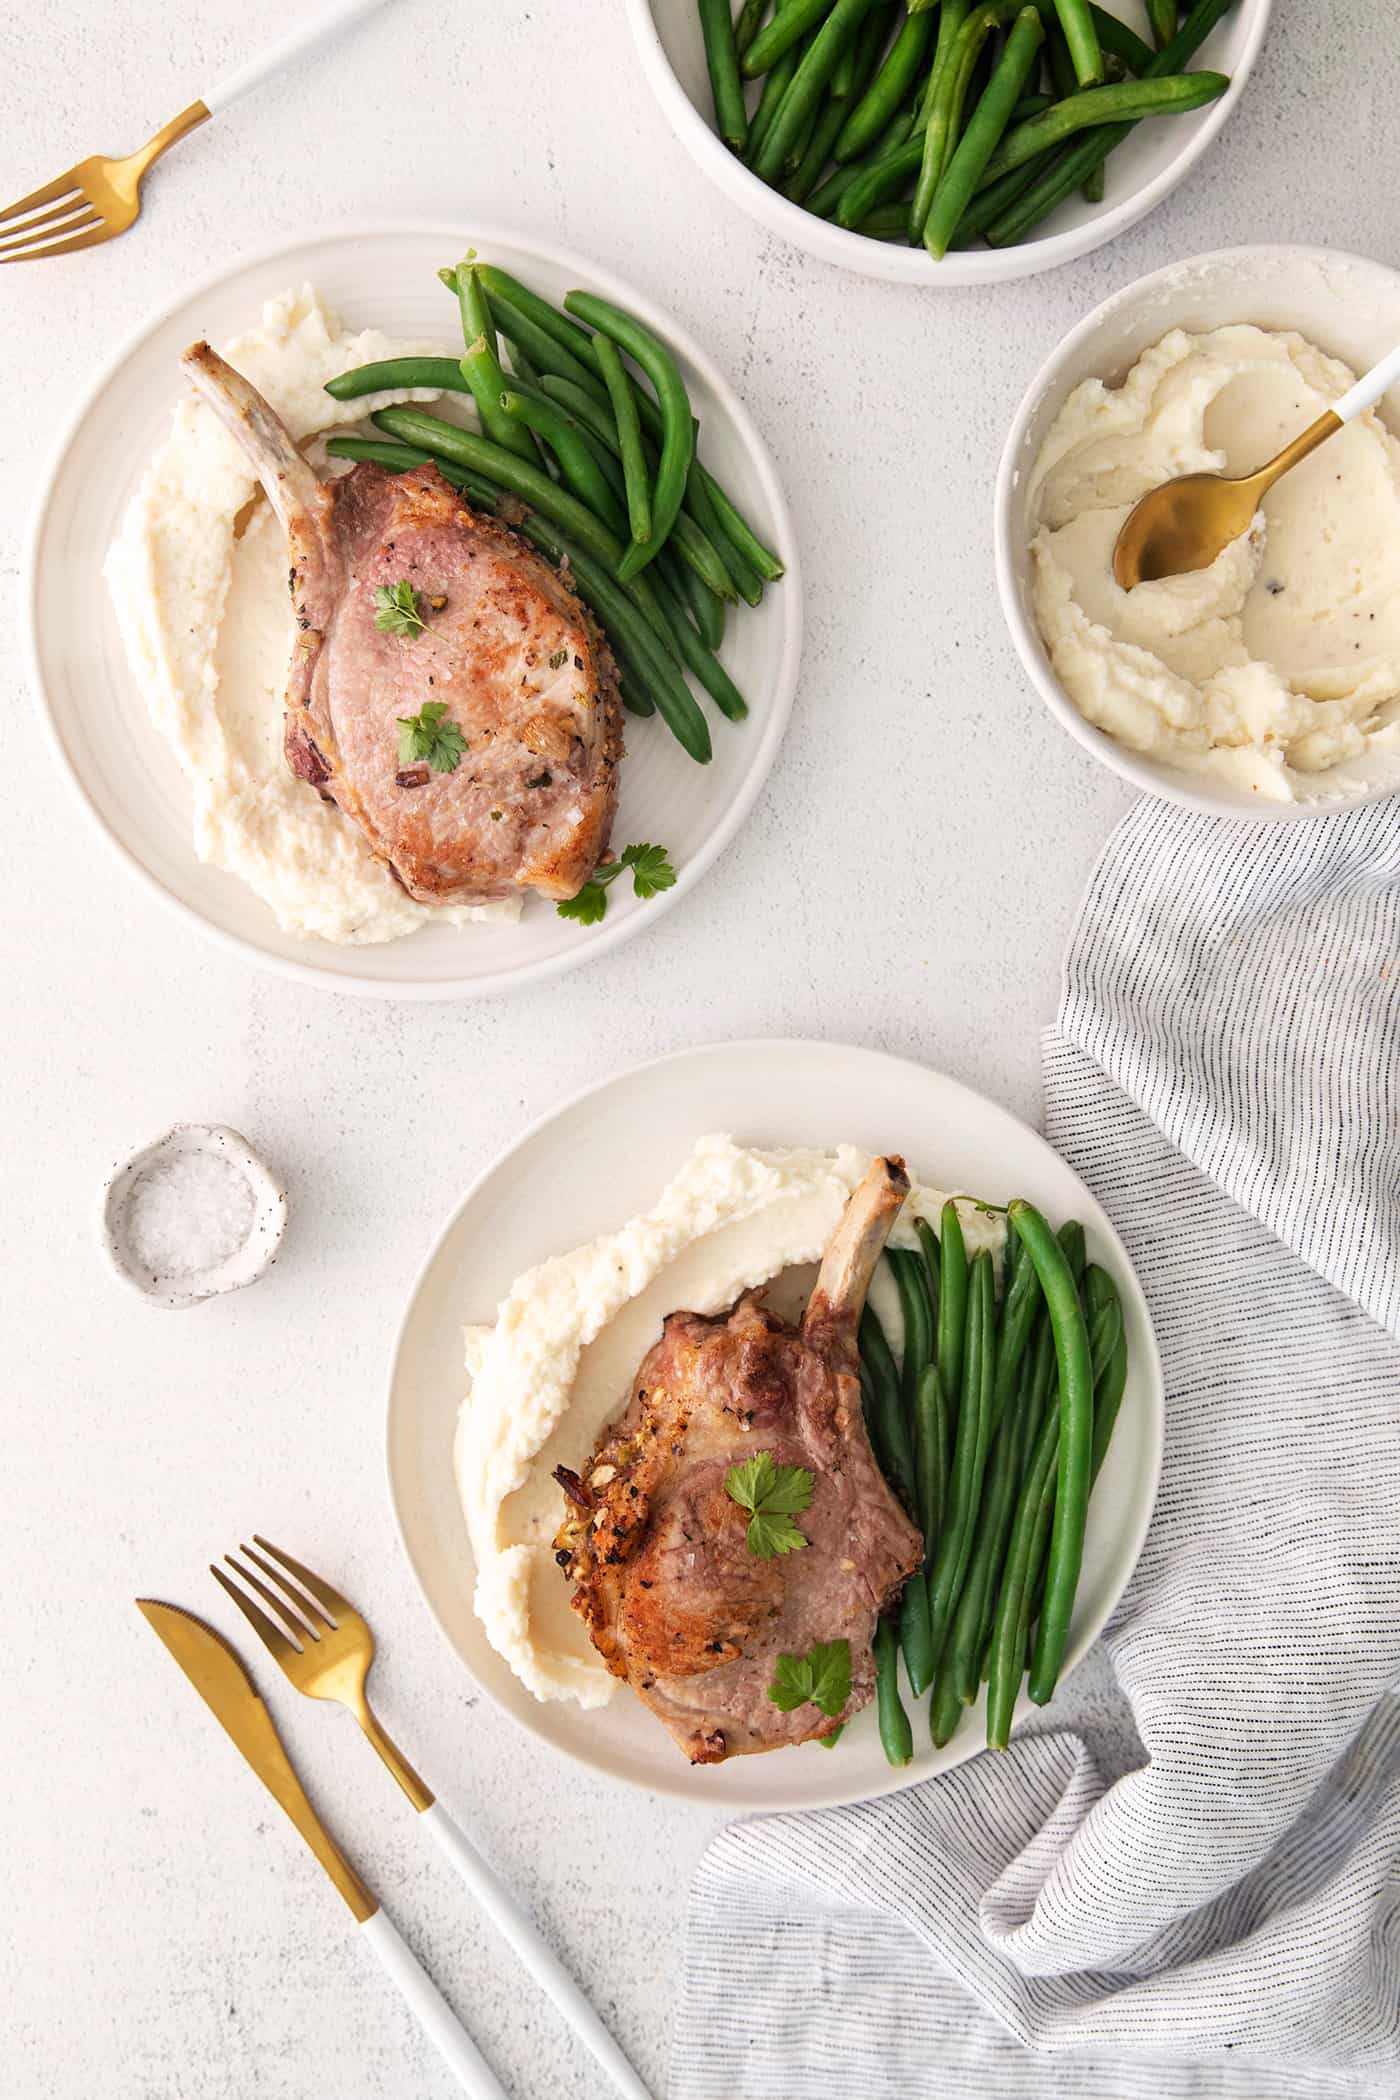 Overhead view of two plates with a stuffed pork chop, mashed potatoes, and green beans